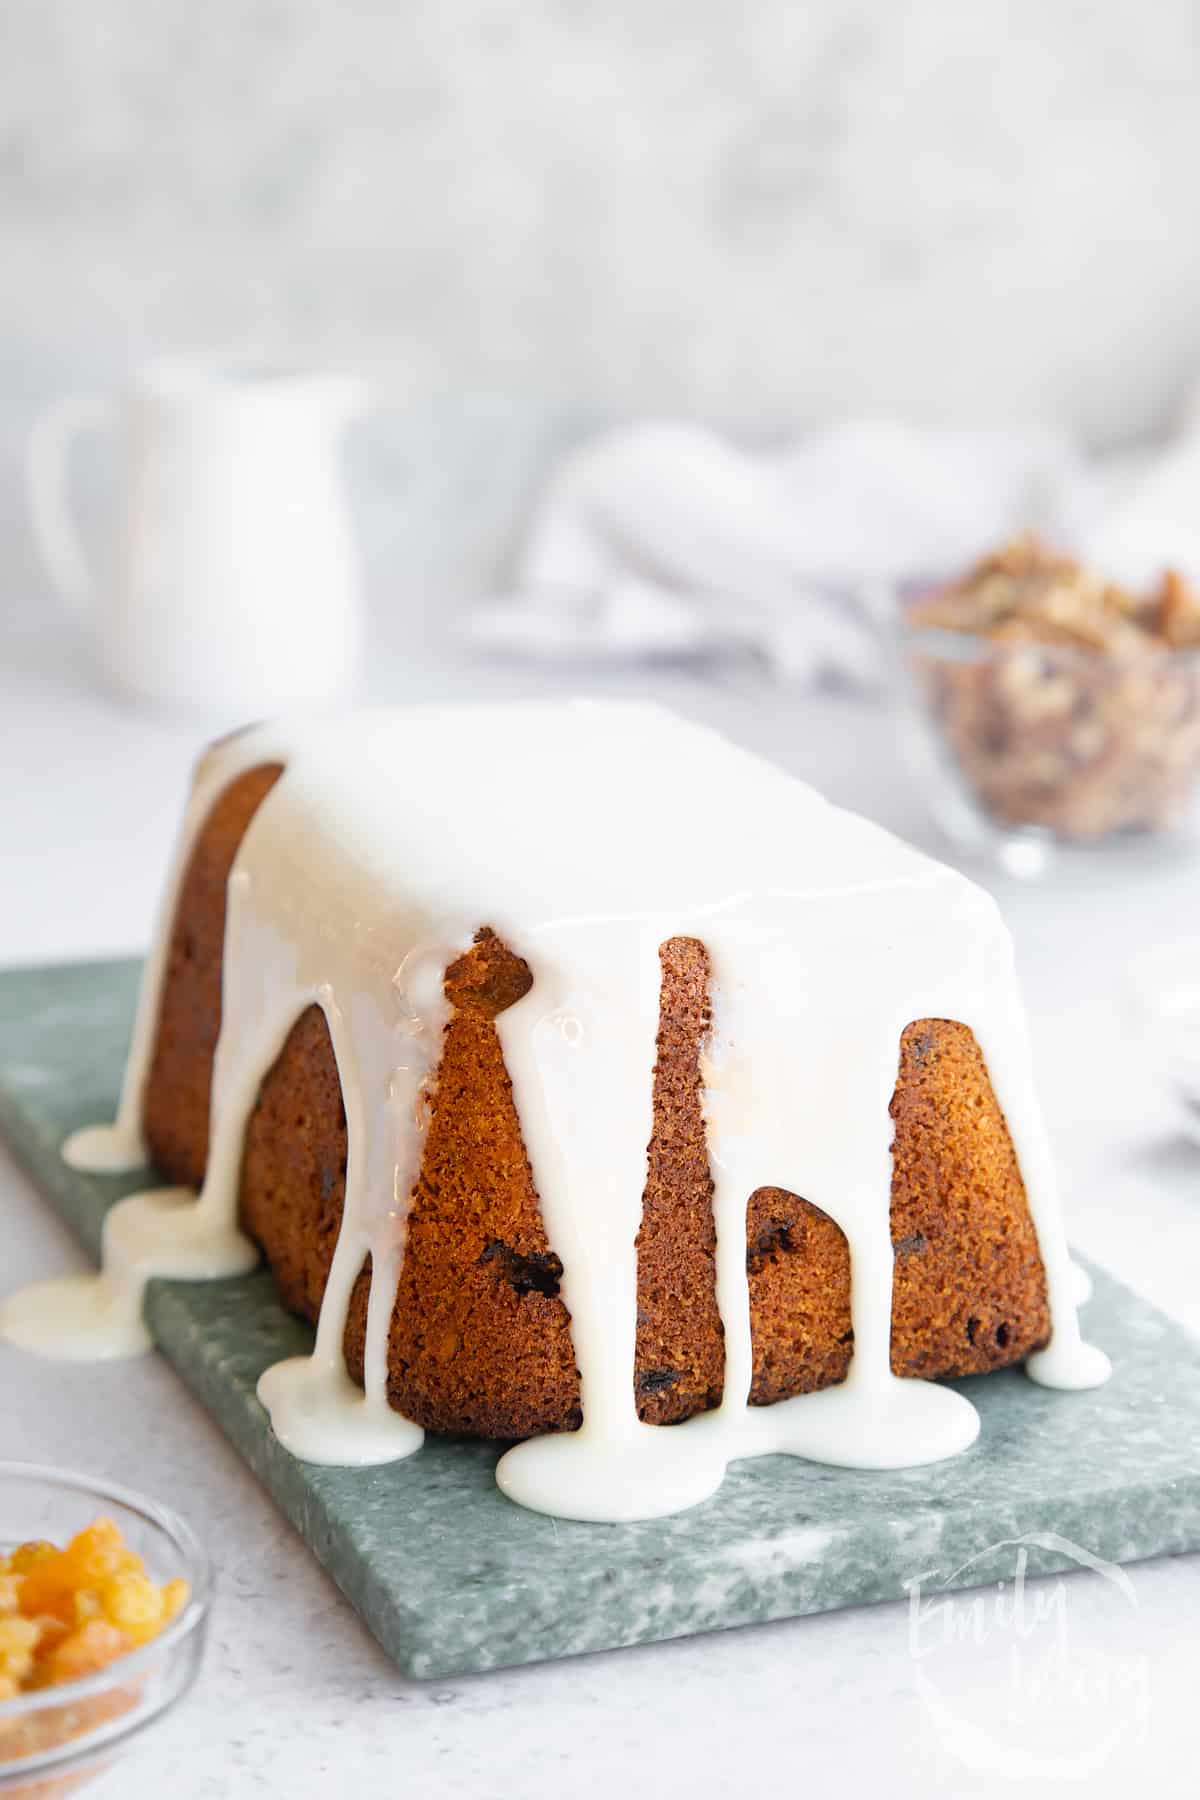 a Vegan carrot loaf cake drizzled with icing on a marble board.